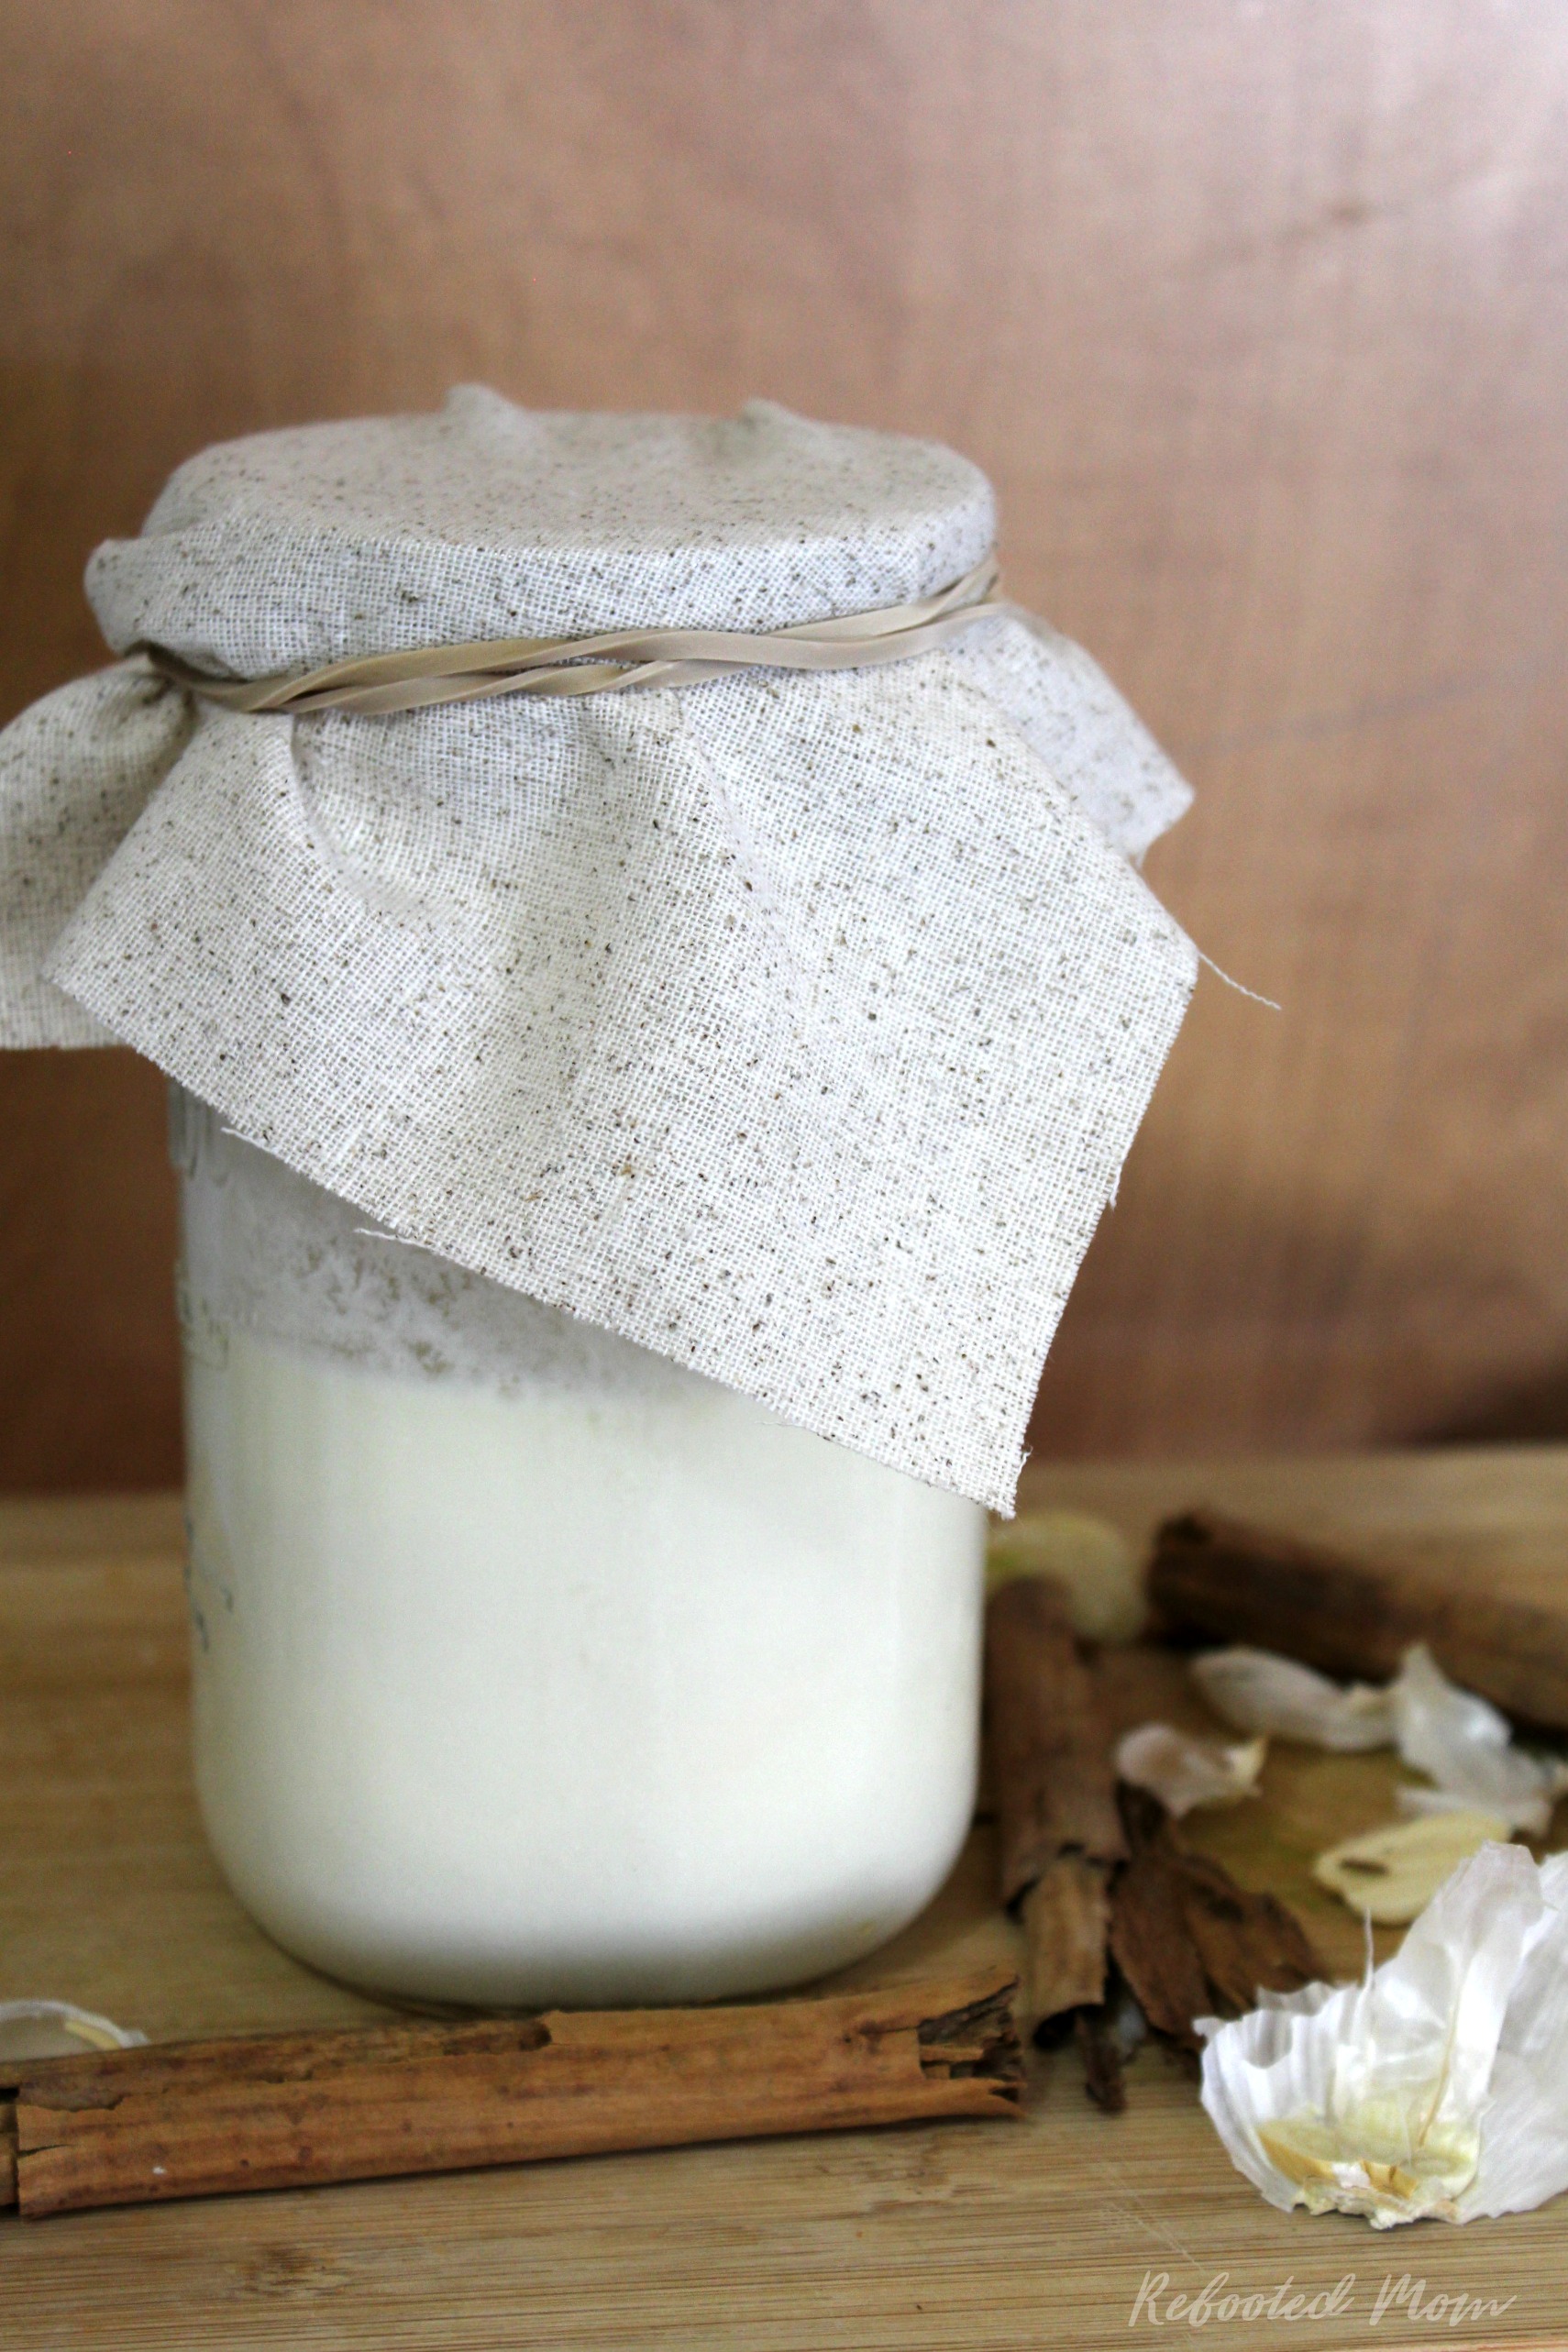 Take your kefir to the next level. Learn how to second ferment kefir for to maximize the nutritional value and improve the overall flavor. It's so easy!